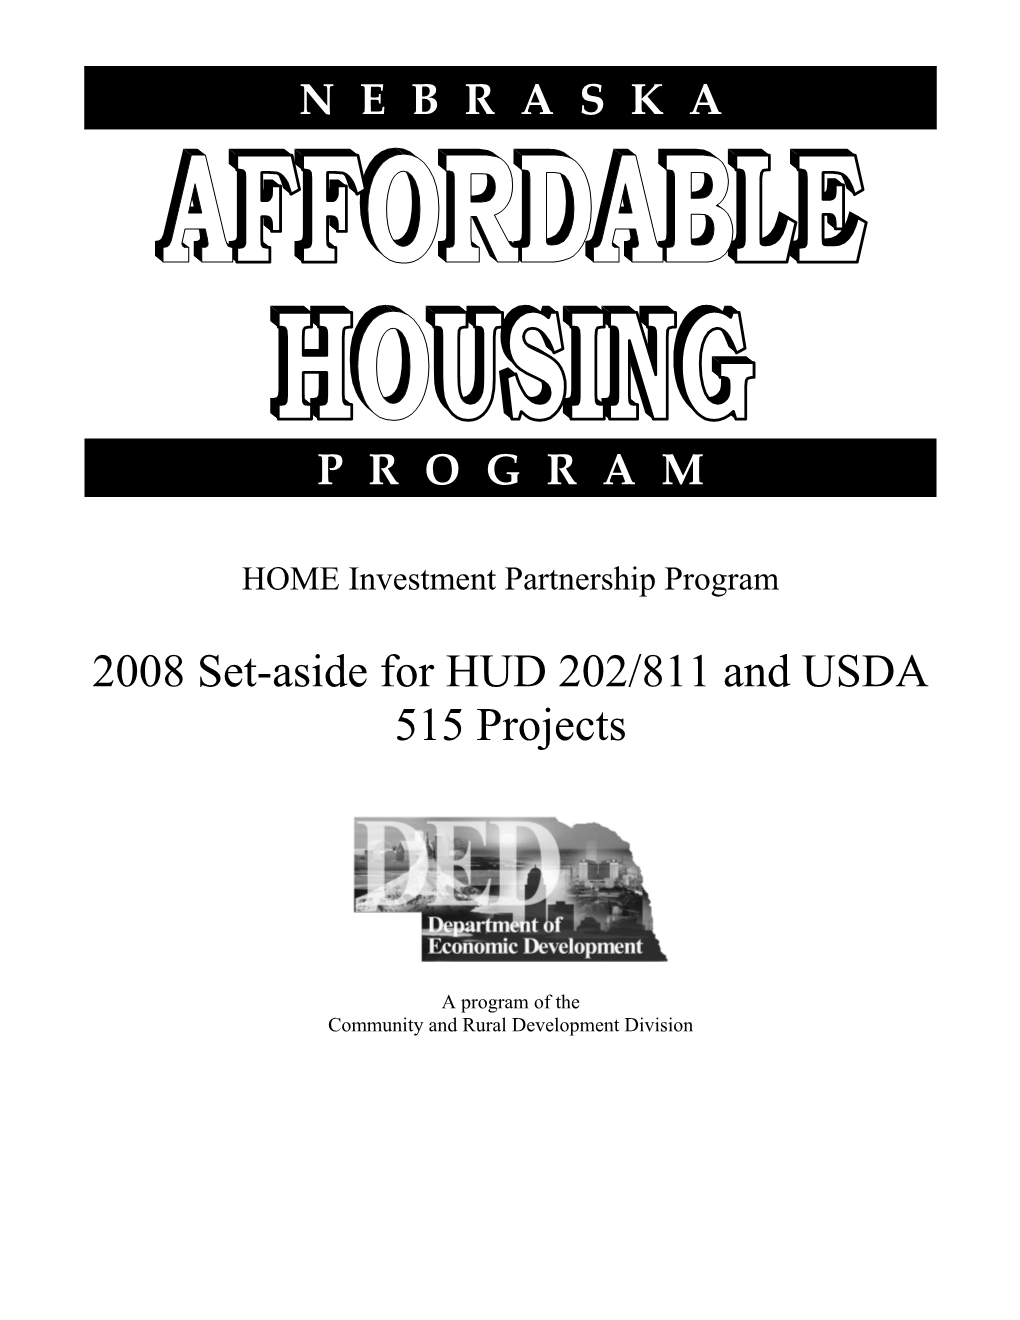 2008 Set-Aside for HUD 202/811 and USDA 515 Projects